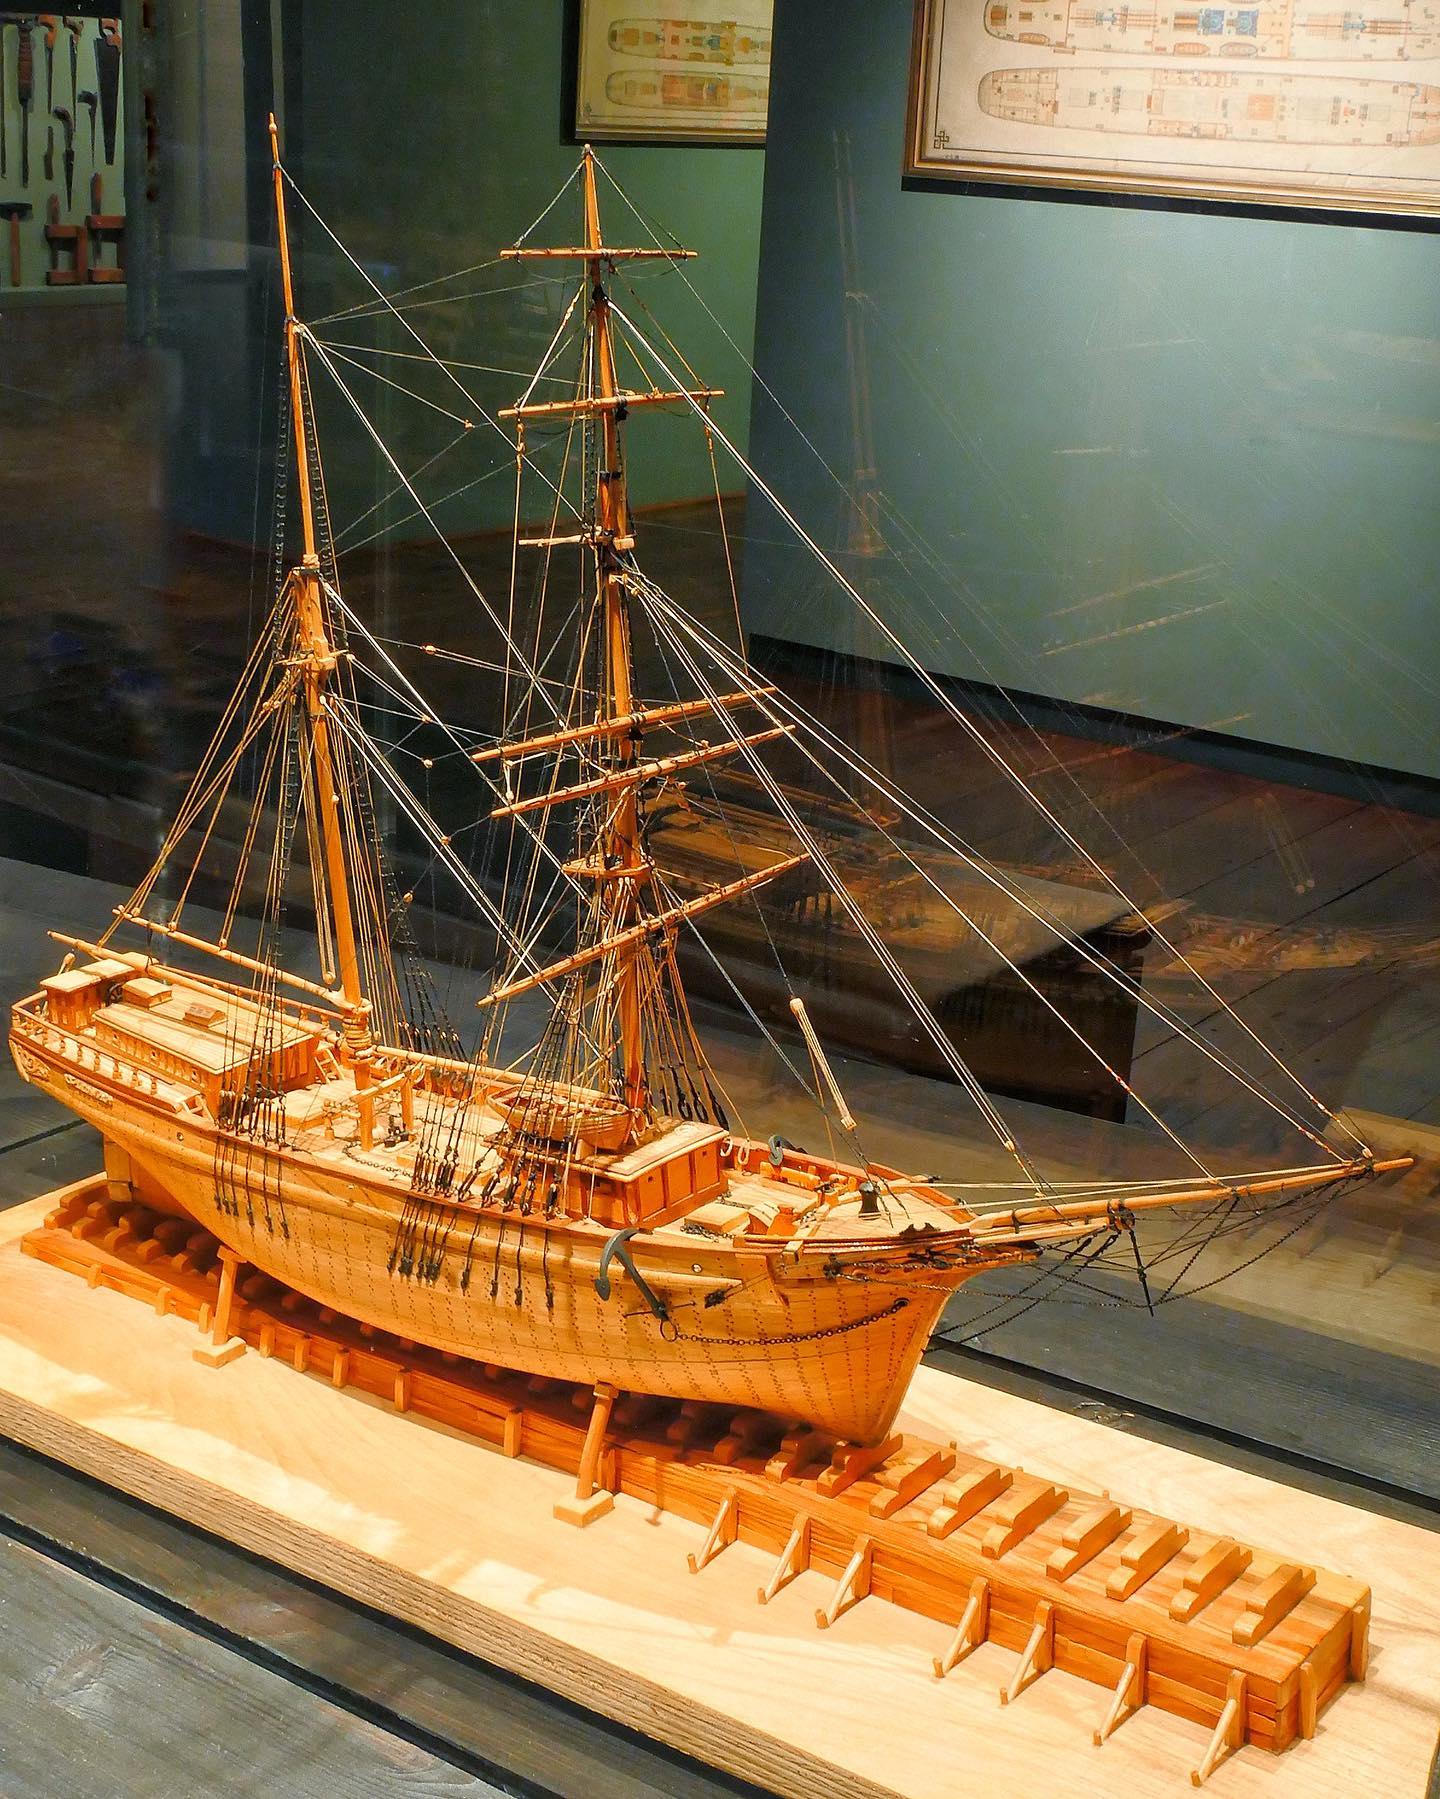 Merchant brigantine Leon. The model in a scale of 1:96 shown here stands as a particularly fine example of Harold Underhill's modelling technique on deck 3 of the museum, which is dedicated to the history of shipbuilding.